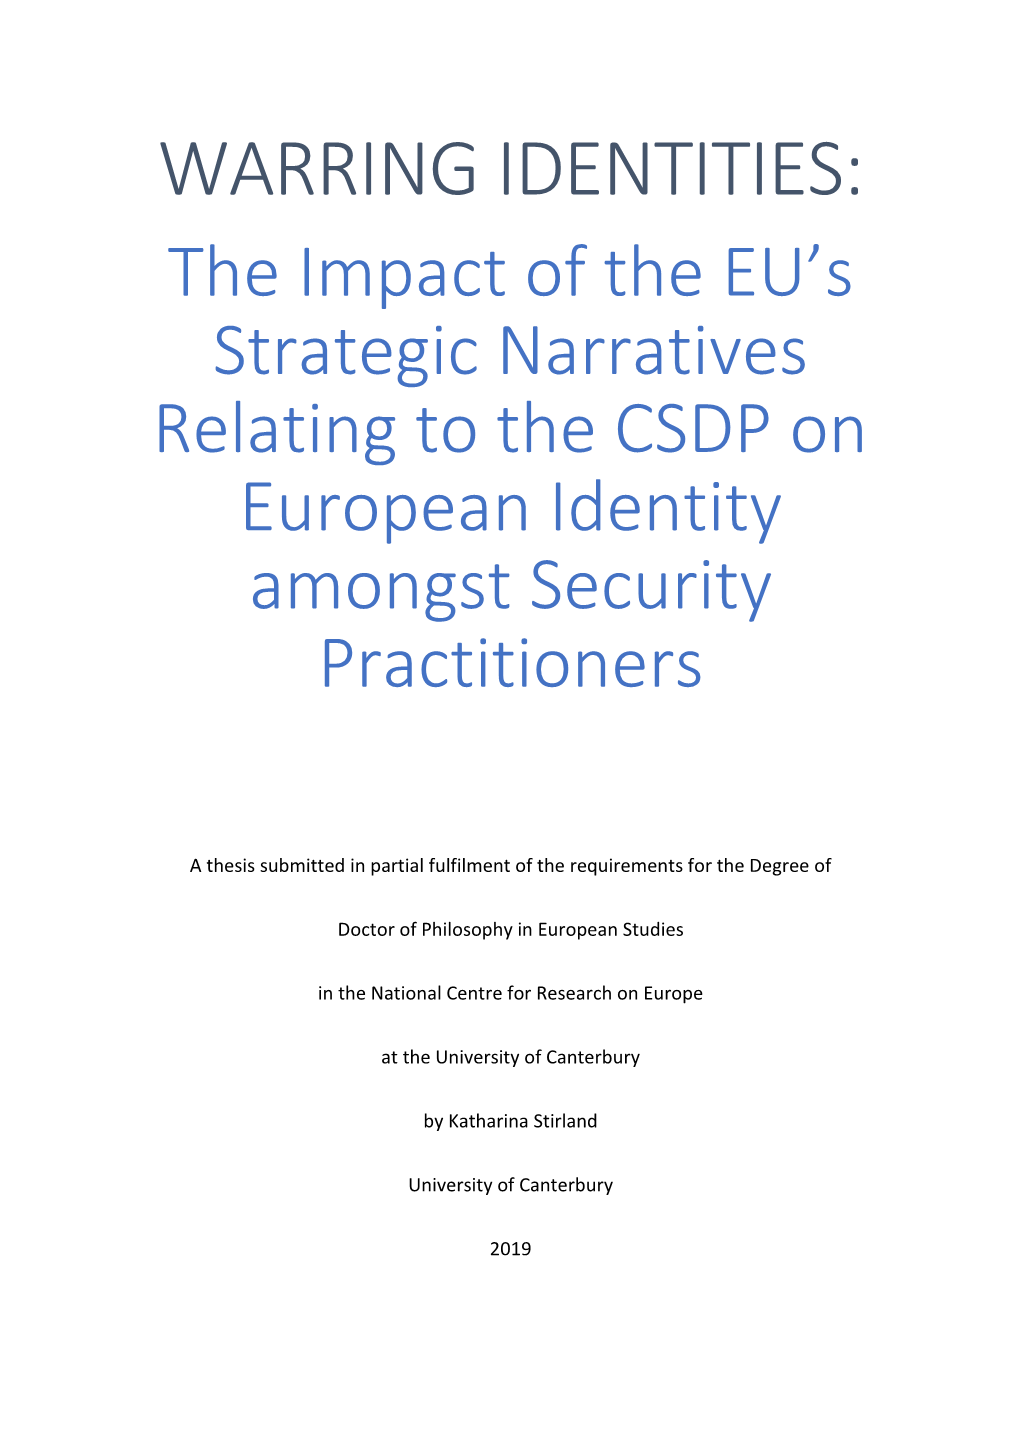 WARRING IDENTITIES: the Impact of the EU’S Strategic Narratives Relating to the CSDP on European Identity Amongst Security Practitioners